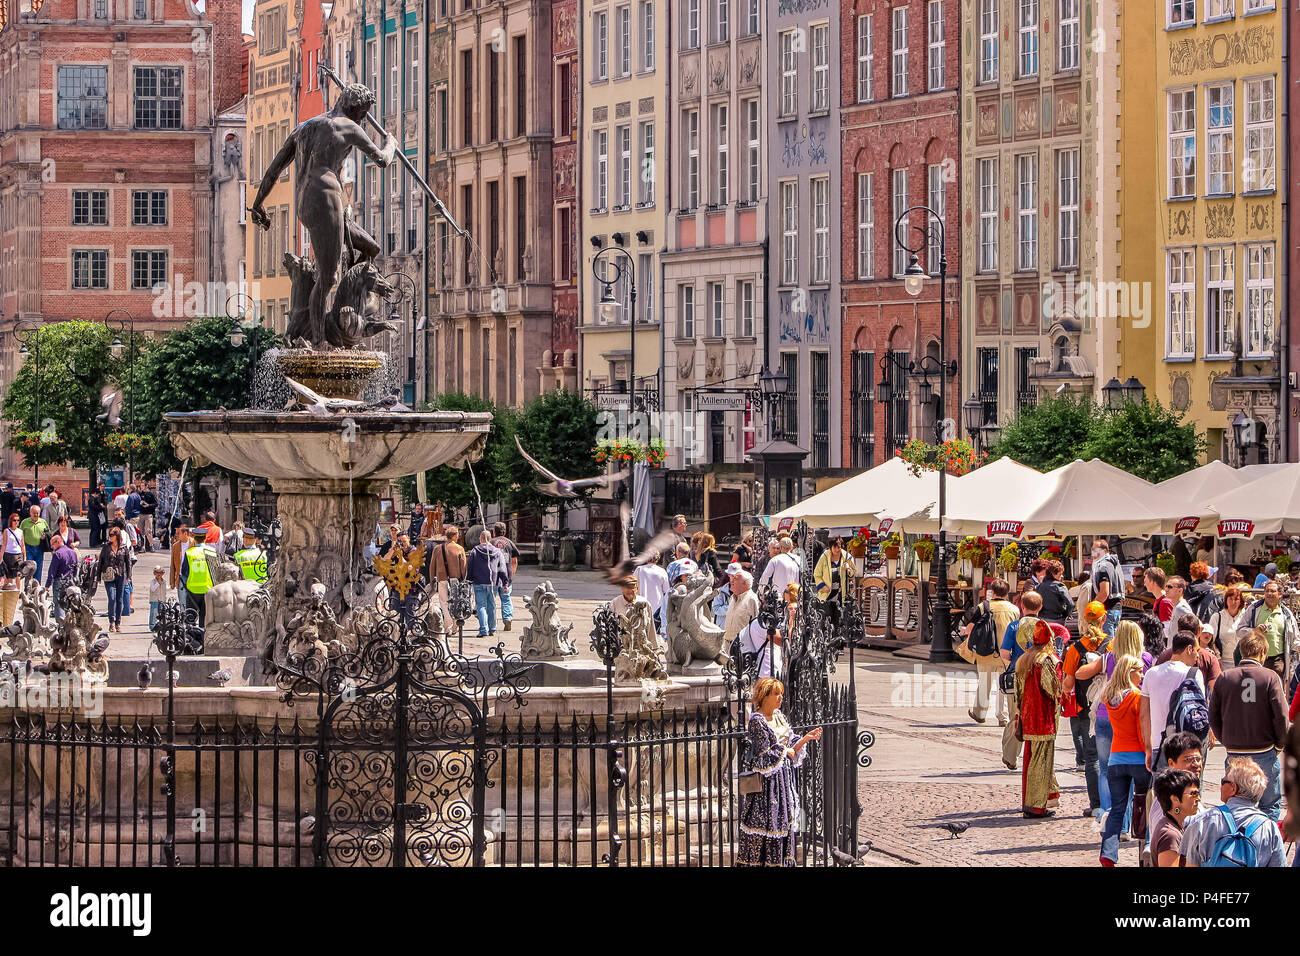 Gdansk / Poland - June 30.2009 : View on the famous sculpture / fountain of Neptune God of the Sea located in the old square. Stock Photo